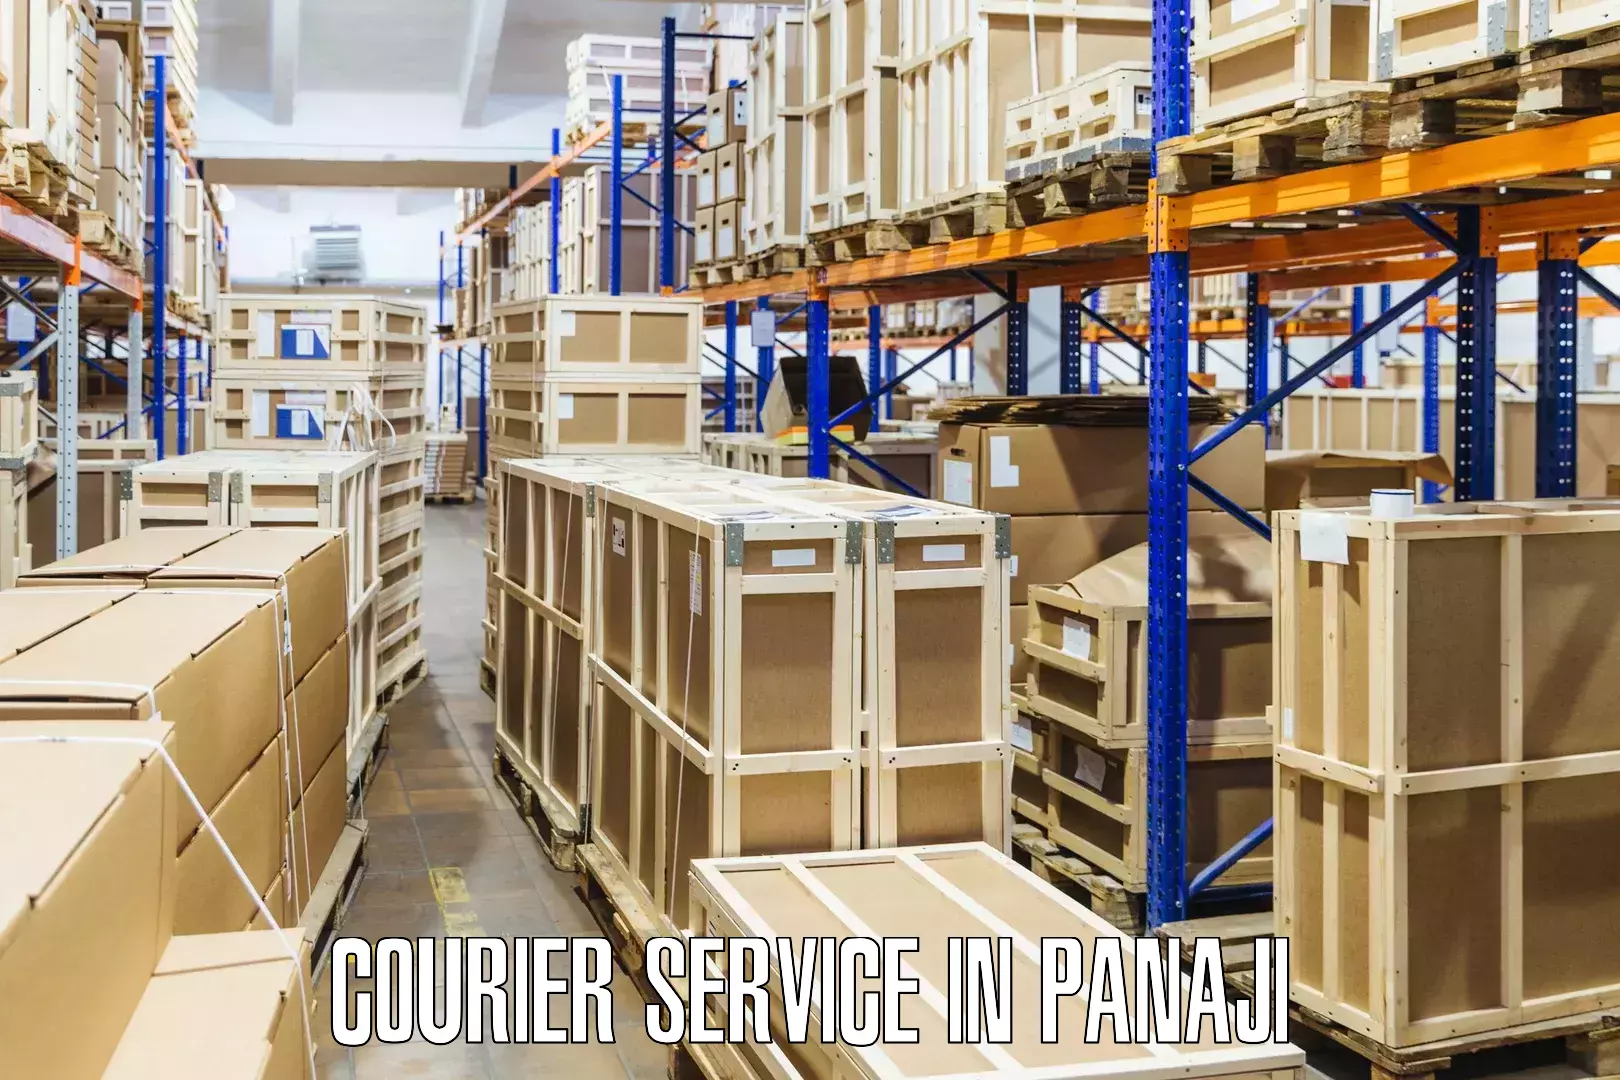 Customer-oriented courier services in Panaji